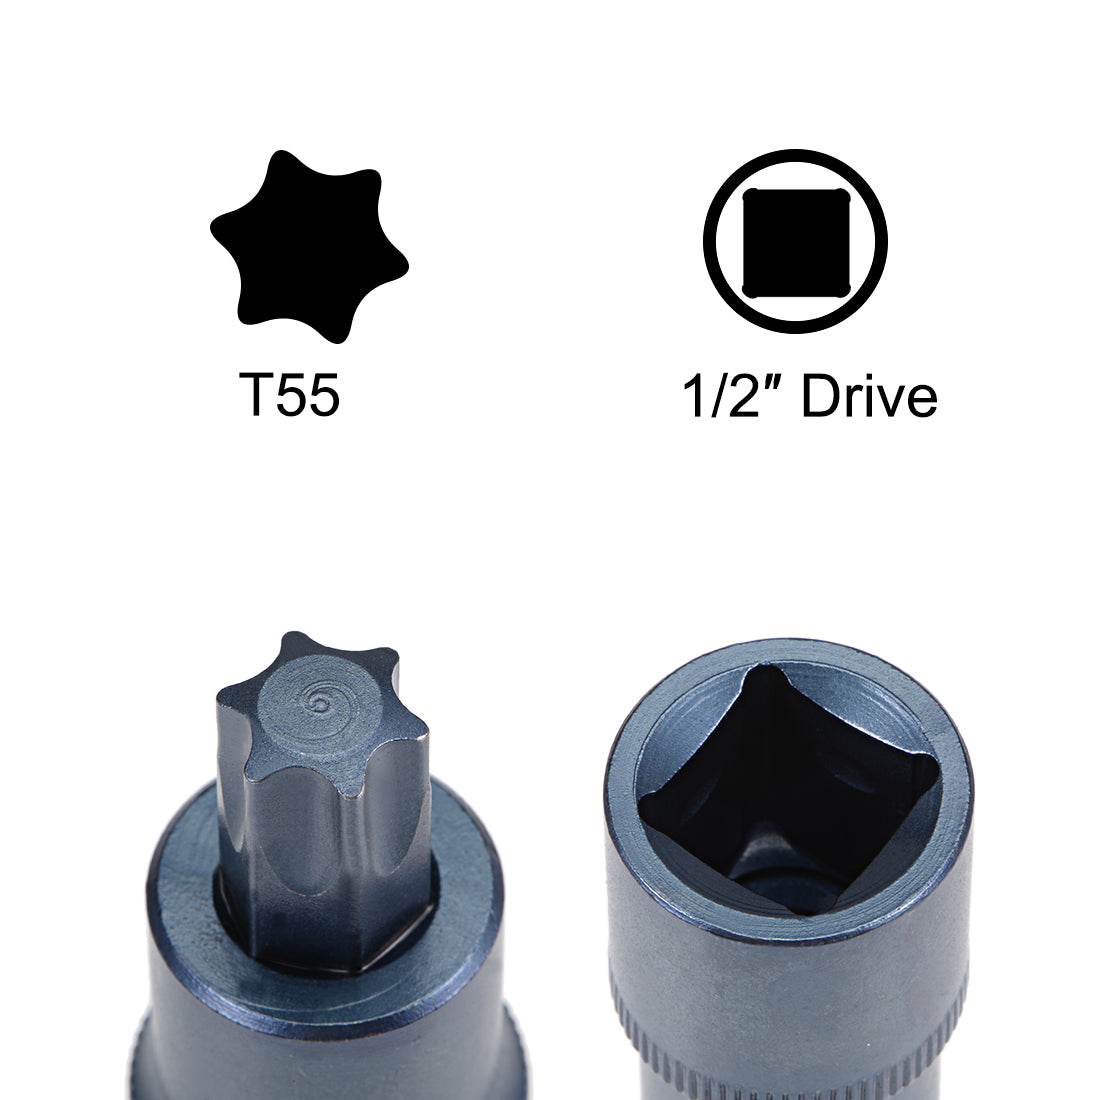 uxcell Uxcell 1/2" Drive x T55 Torx Bit Socket, S2 Steel Bits, CR-V Sockets Metric 2" Length (For Hand Use Only) 2pcs